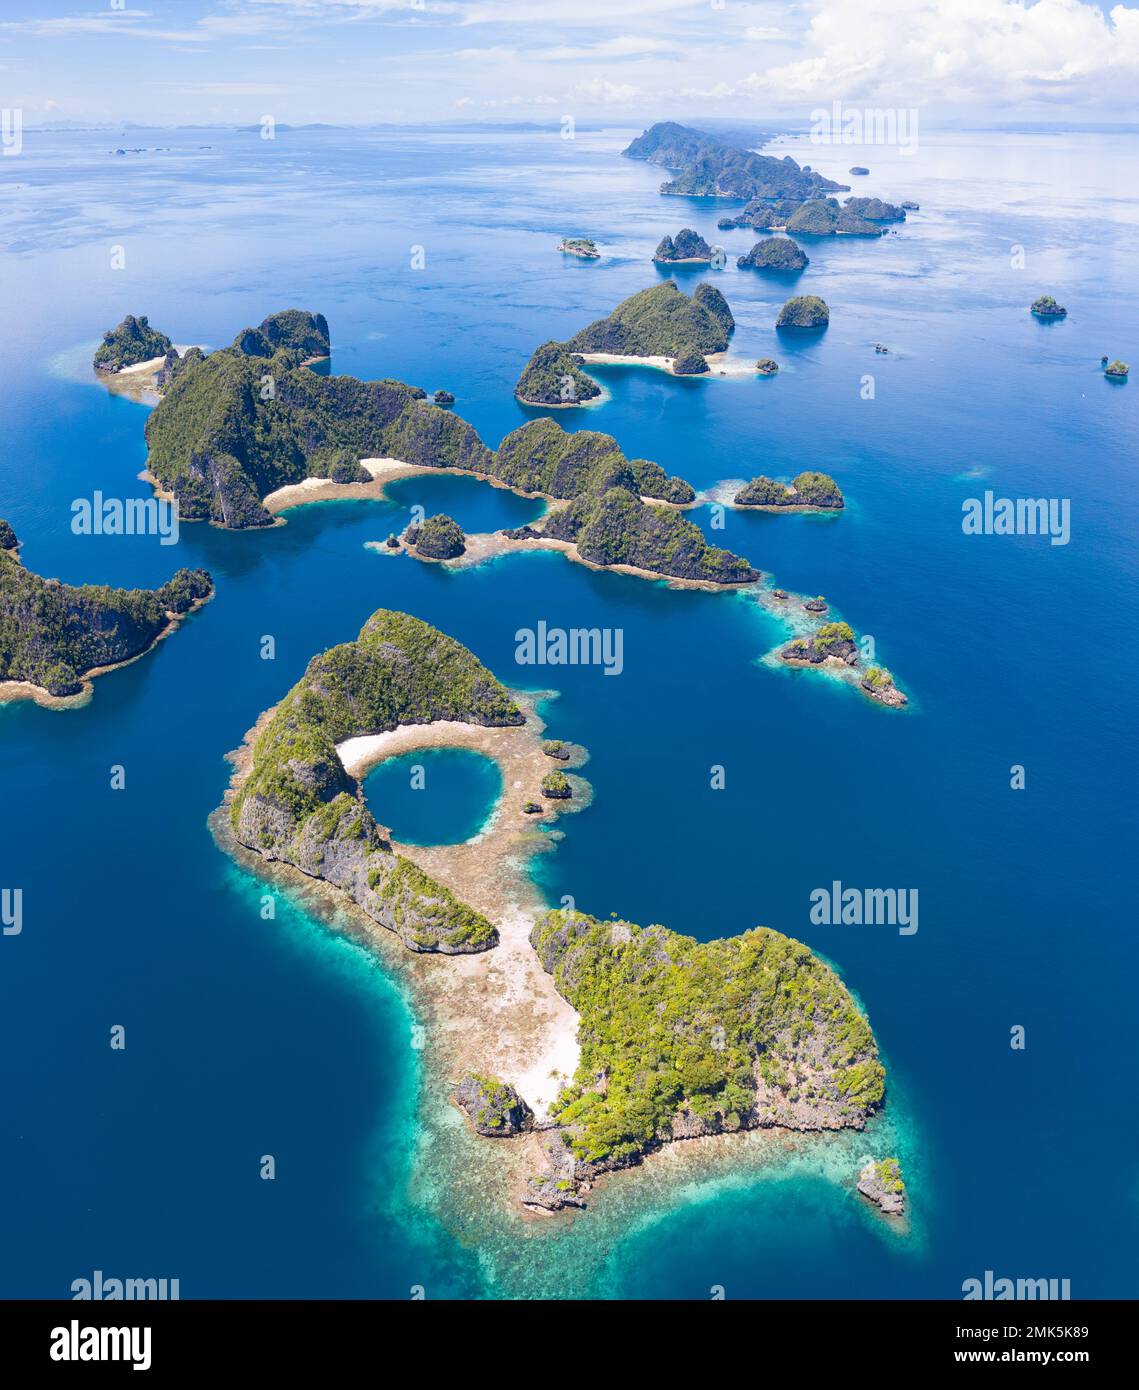 Rock islands, composed of limestone, rise from the tropical seascape in Raja Ampat, Indonesia. These islands are ancient uplifted coral reefs. Stock Photo